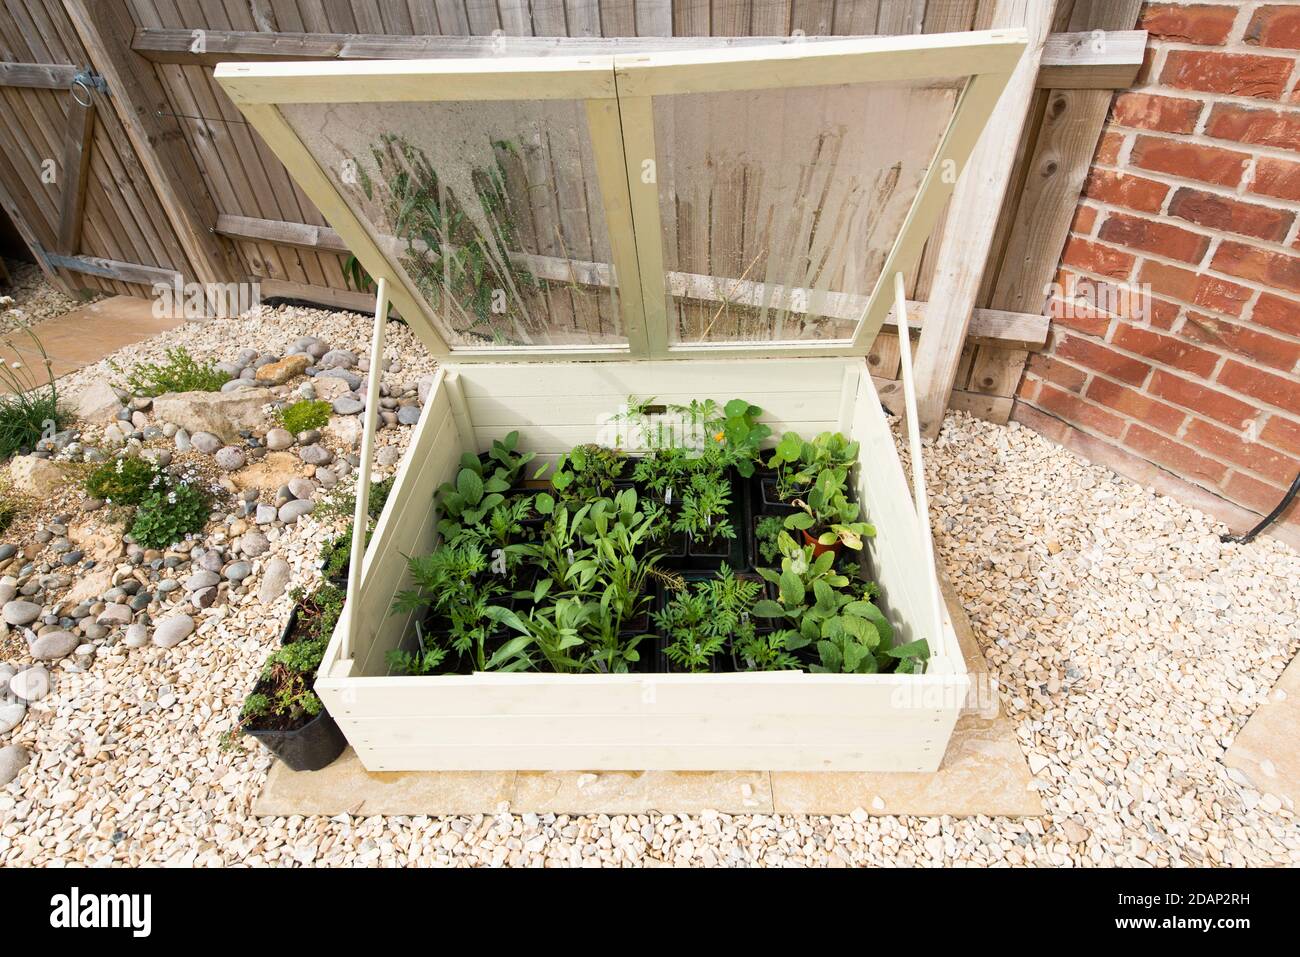 Cold frame full of young annual plants hardening off in a domestic garden, England, UK Stock Photo